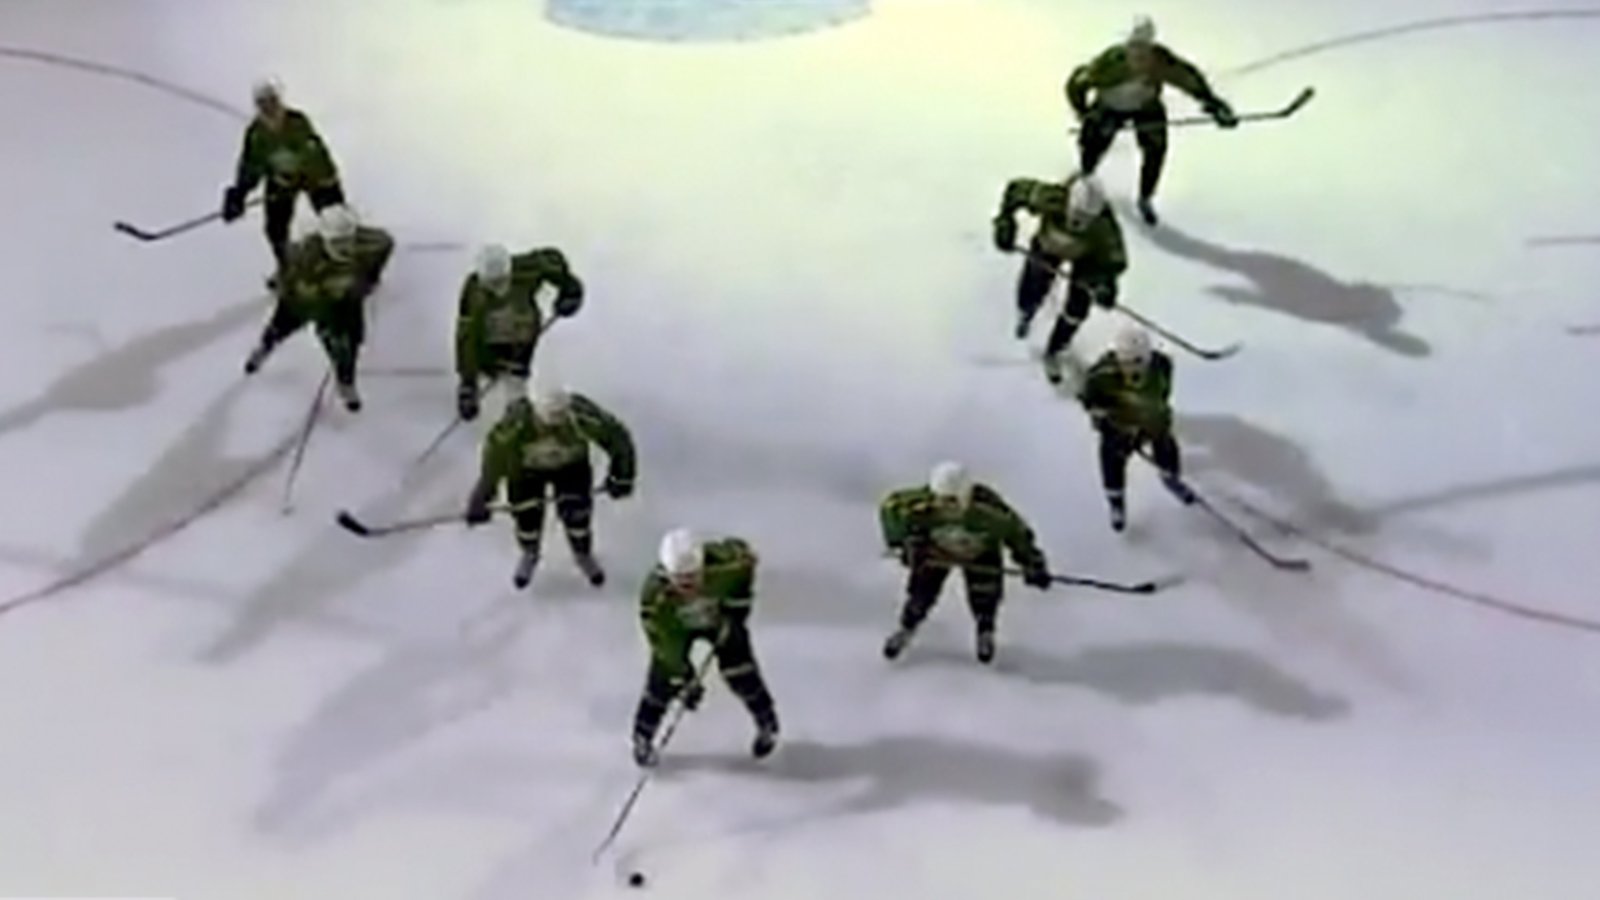 Mighty Ducks cast reunite and recreate “The Flying V” prior to Ducks/Canucks game